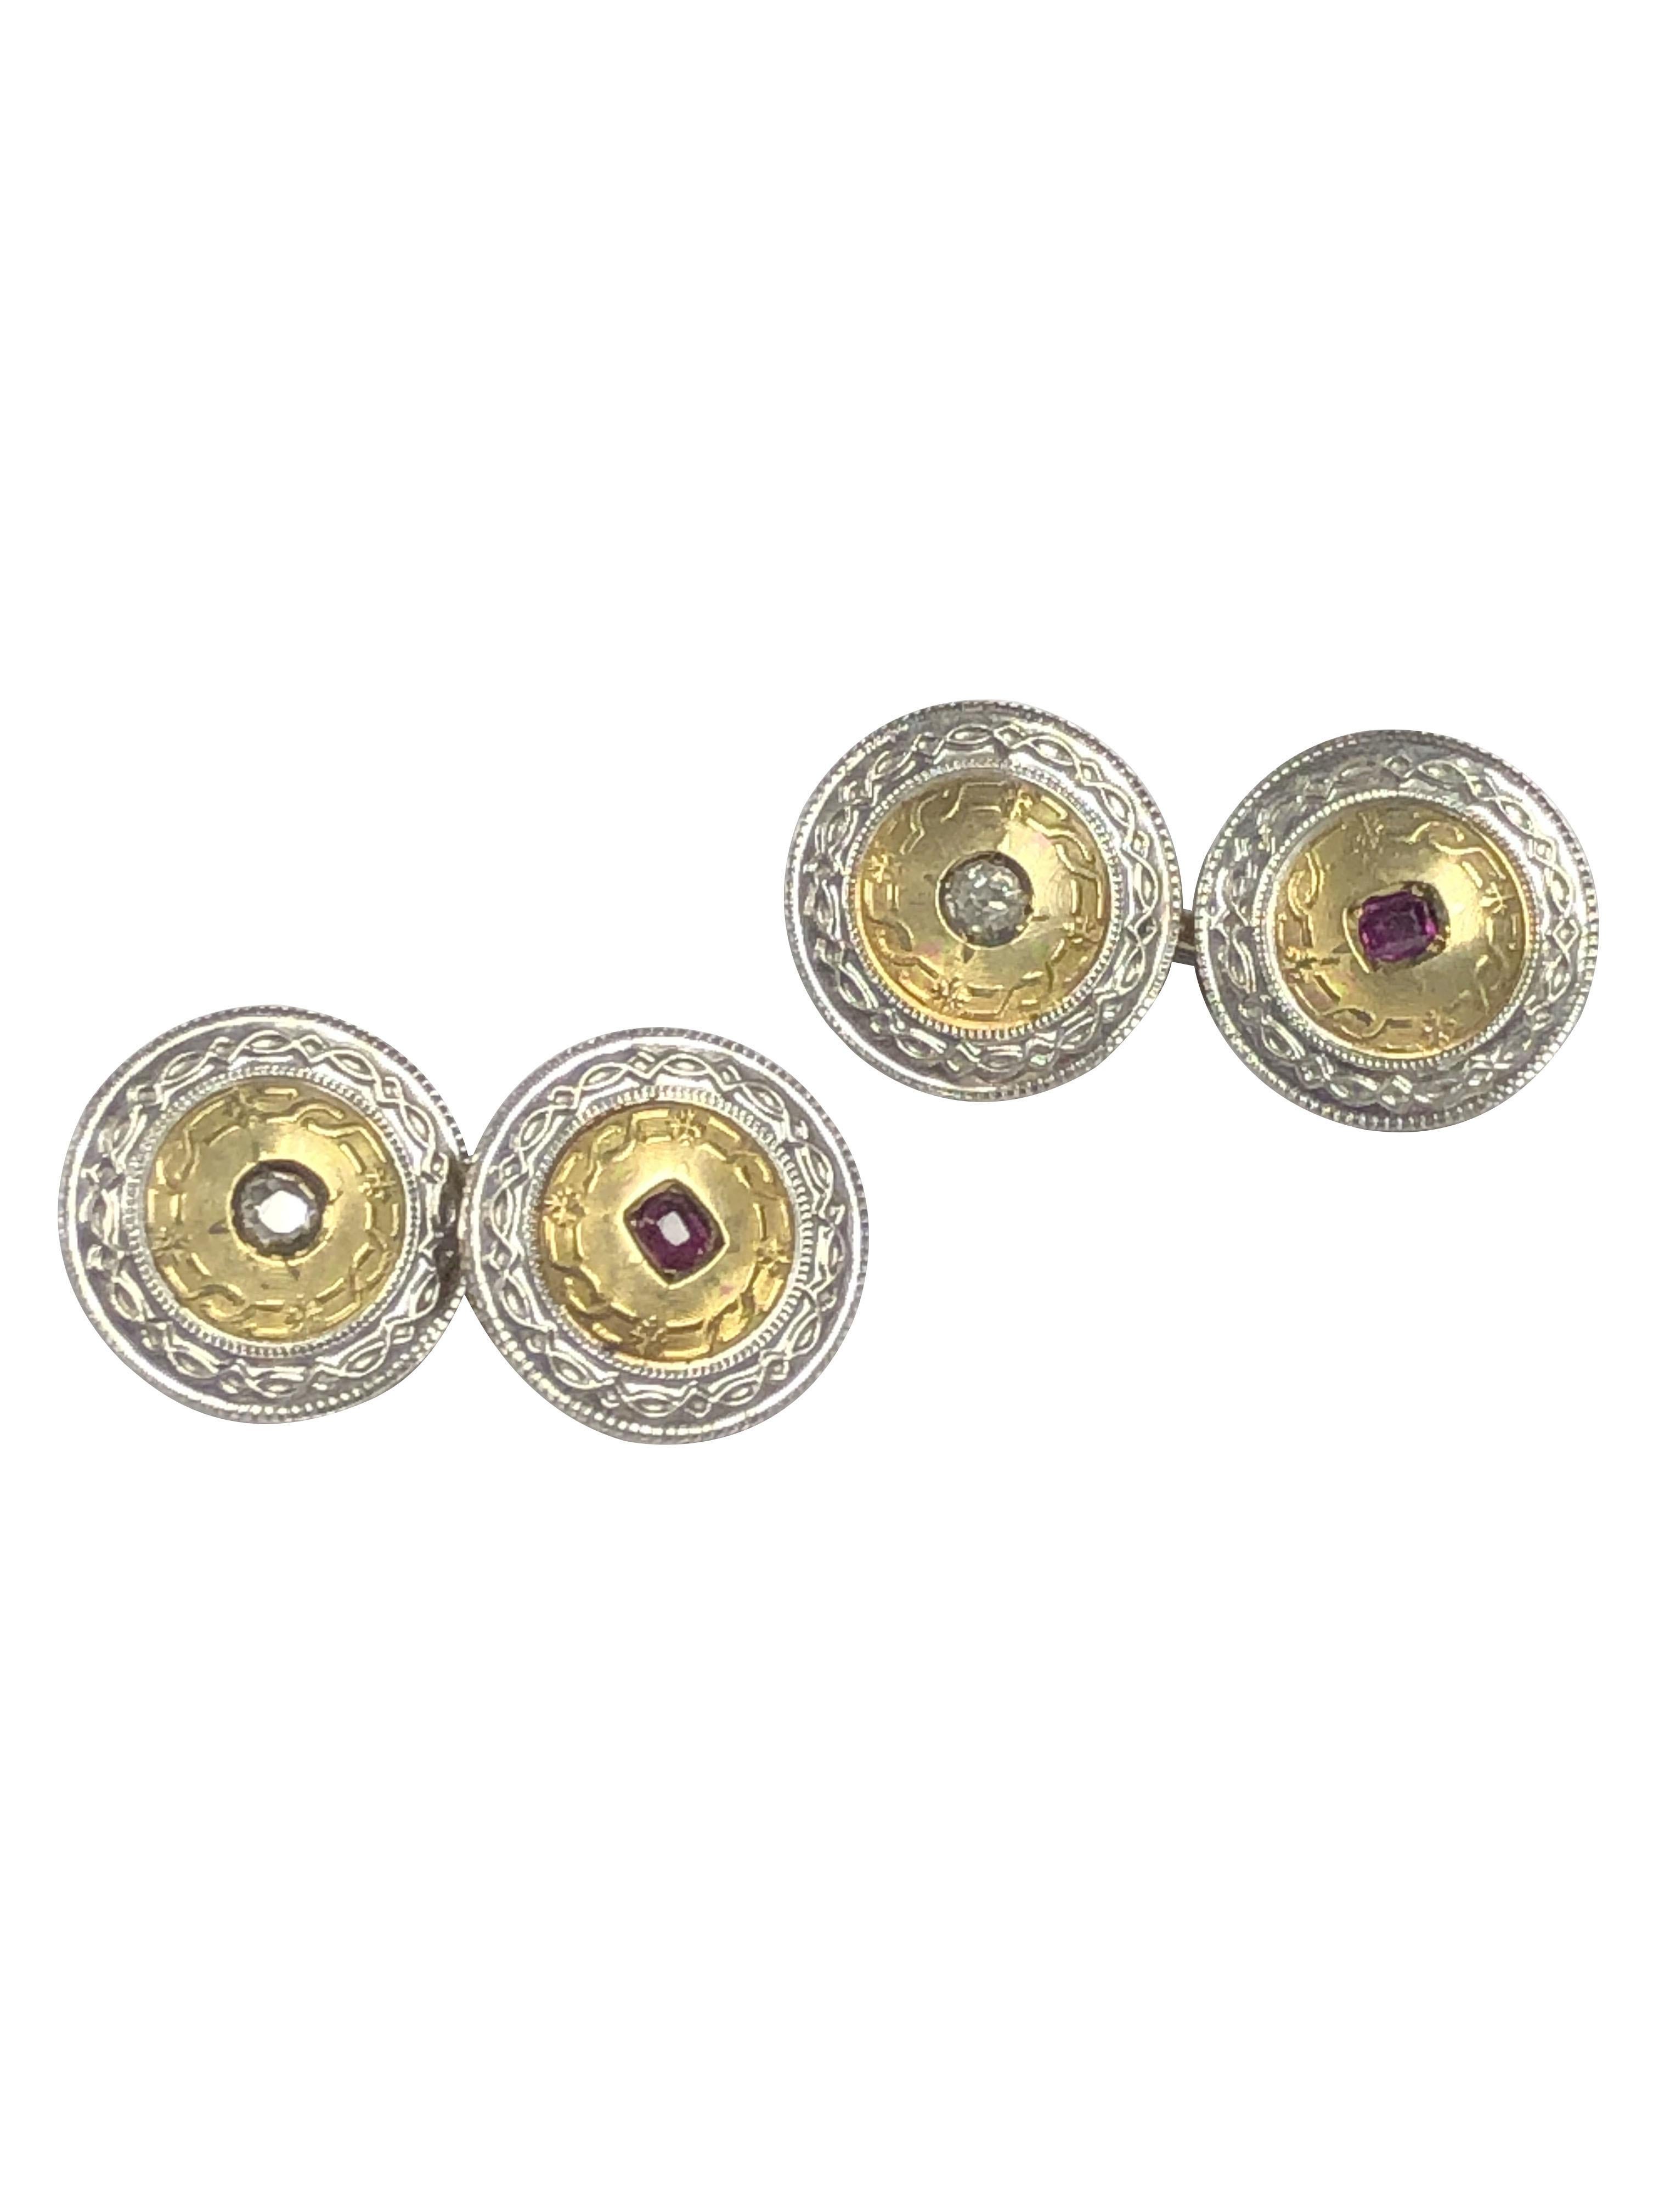 Circa 1915 14k Yellow Gold and Platinum Cufflinks, measuring 9/16 inch in diameter the double sided cufflinks have a hand finished Edwardian style pattern, set with Fine color Cushion Rubies and Old Mine cut Diamonds.